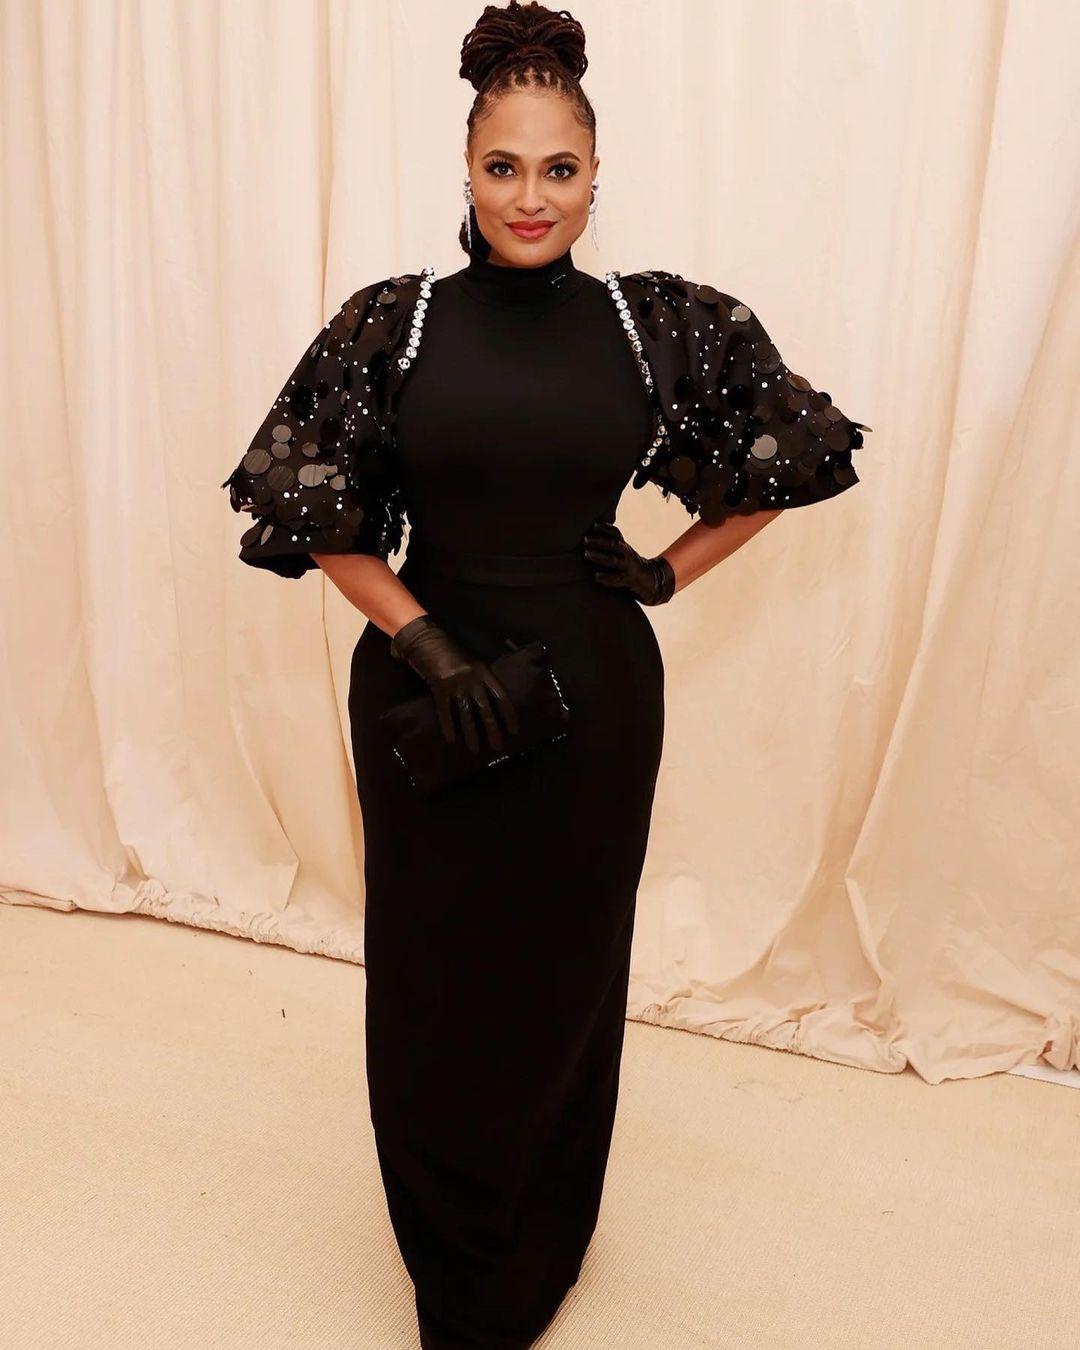 Ava DuVernay looks amazing in this photo, showing her in a long black gown.